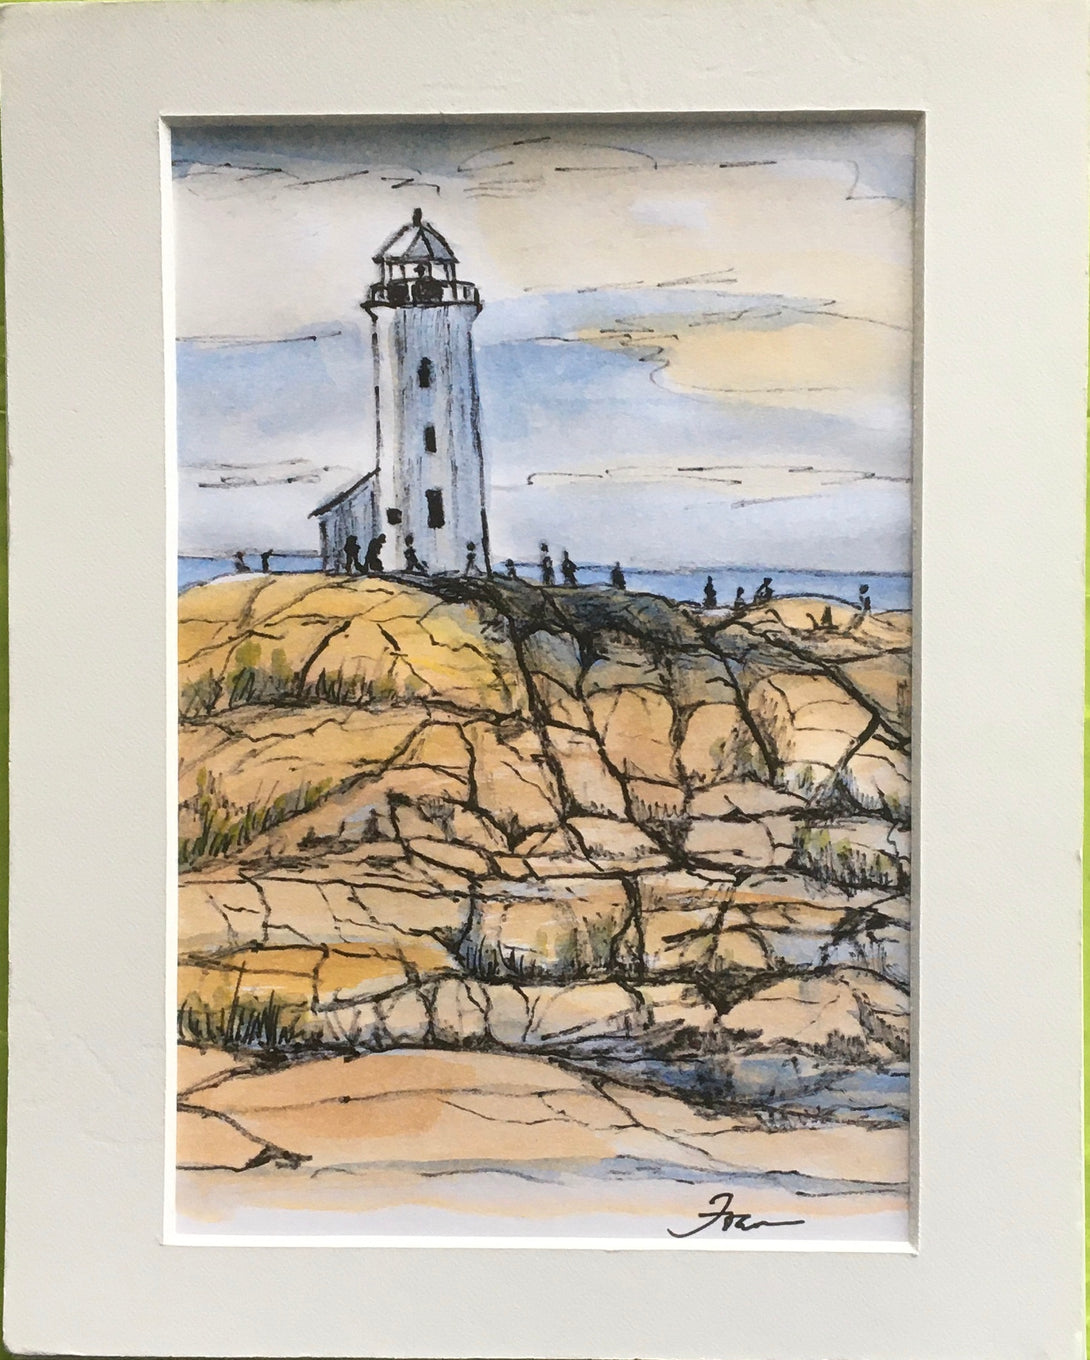 Fran Renwick -Watercolour Painting - Lighthouse, matted, unframed - Fran Renwick - McMillan Arts Centre Gallery, Gift Shop and Box Office - Vancouver Island Art Gallery